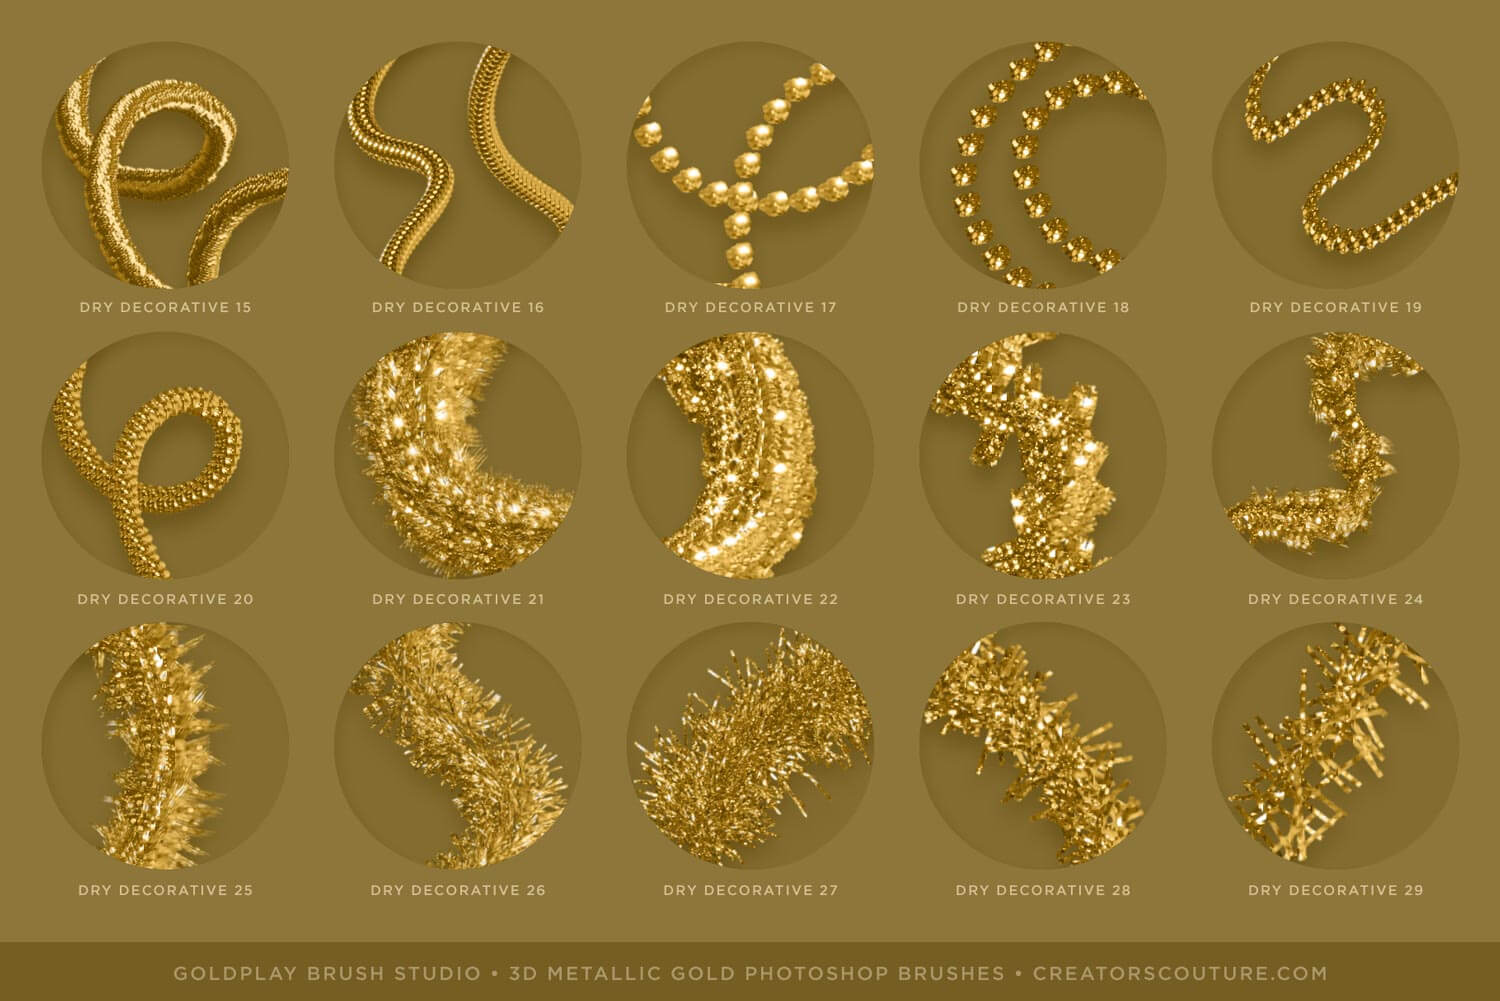 3d metallic gold tinsel and gold chain brushes chart 5 - Photoshop brush strokes that resemble 3d gold chains, liquid gold, & dimensional metallic gold